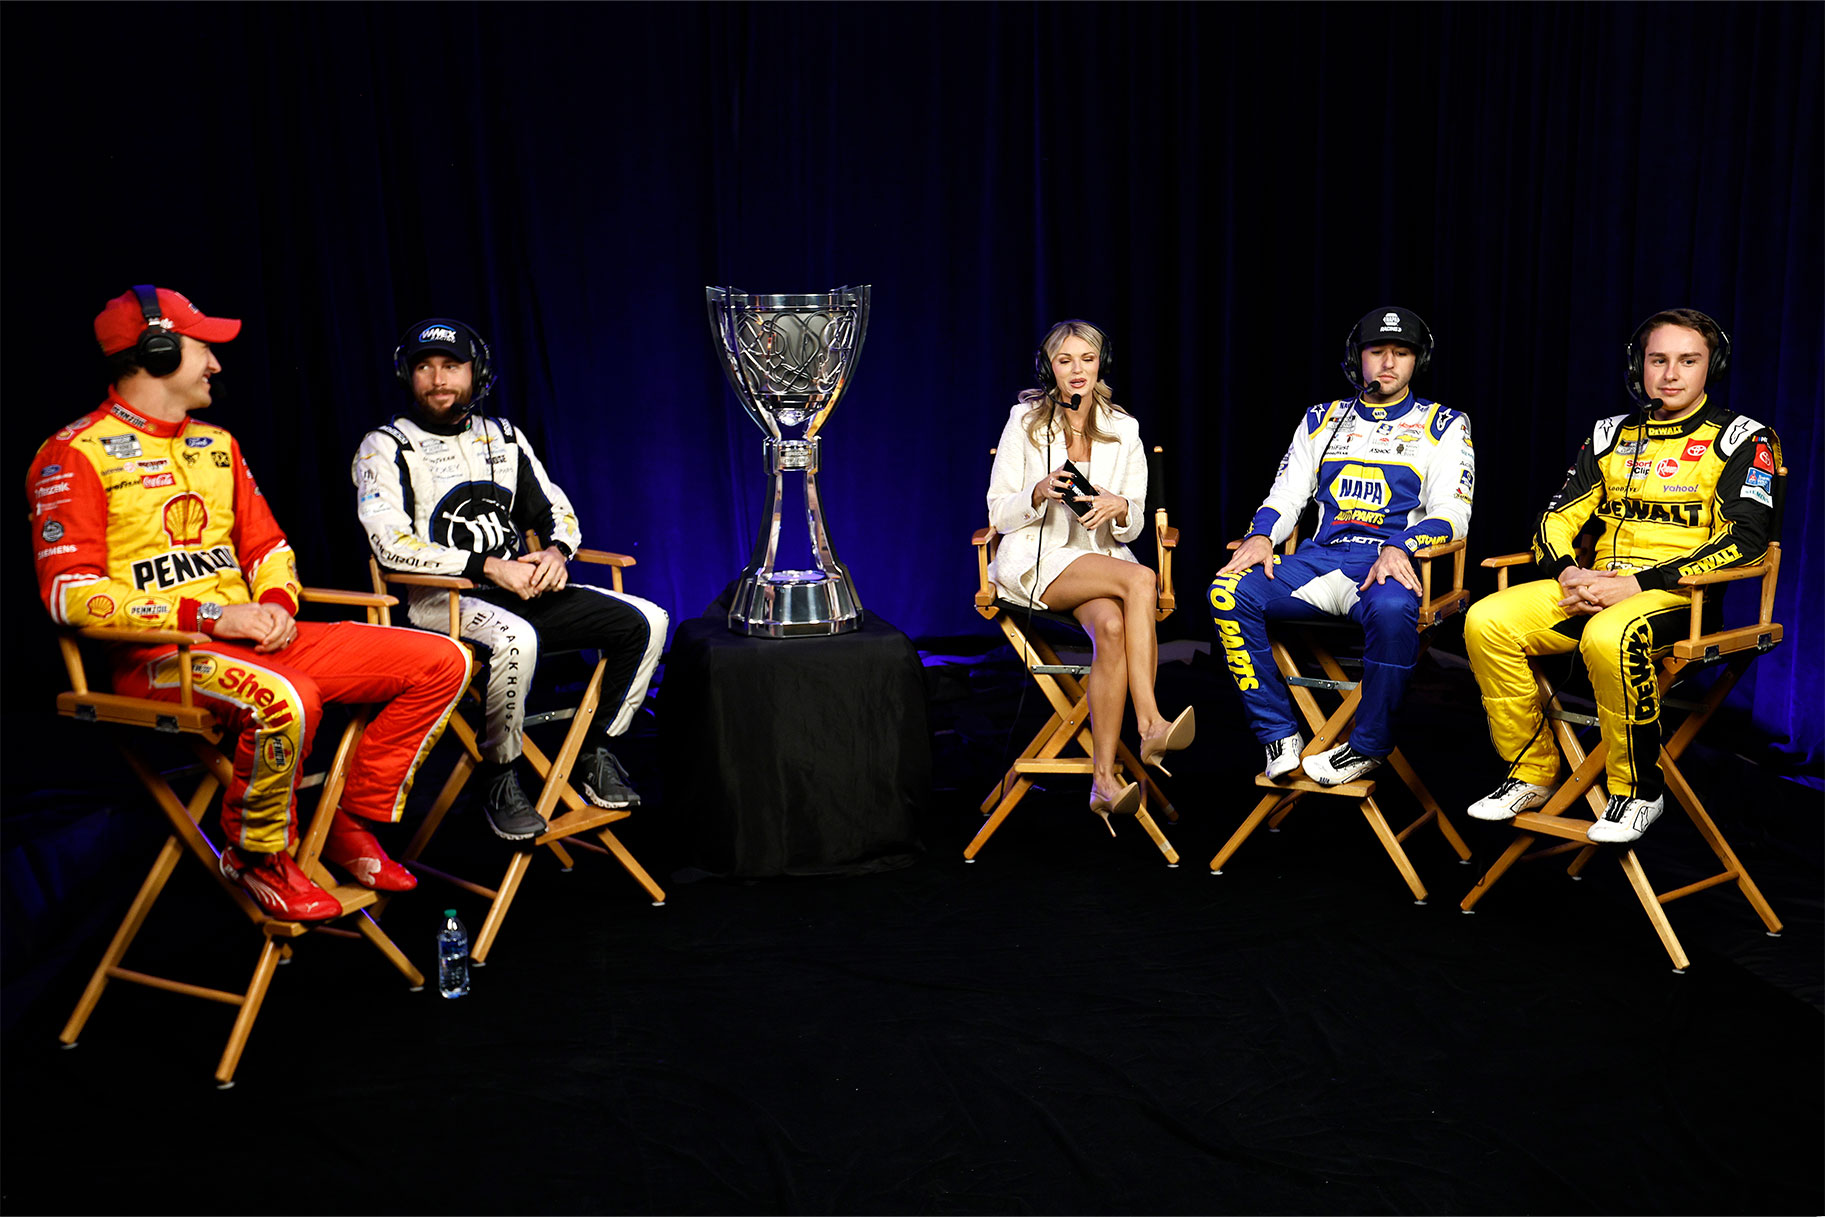 L-R) Joey Logano, driver of the #22 Shell Pennzoil Ford, Ross Chastain, driver of the #1 Moose Fraternity Chevrolet, host Alex Weaver, Chase Elliott, driver of the #9 NAPA Auto Parts Chevrolet, and Christopher Bell, driver of the #20 DeWalt Toyota, talk during a roundtable discussion at the NASCAR Championship 4 Media Day